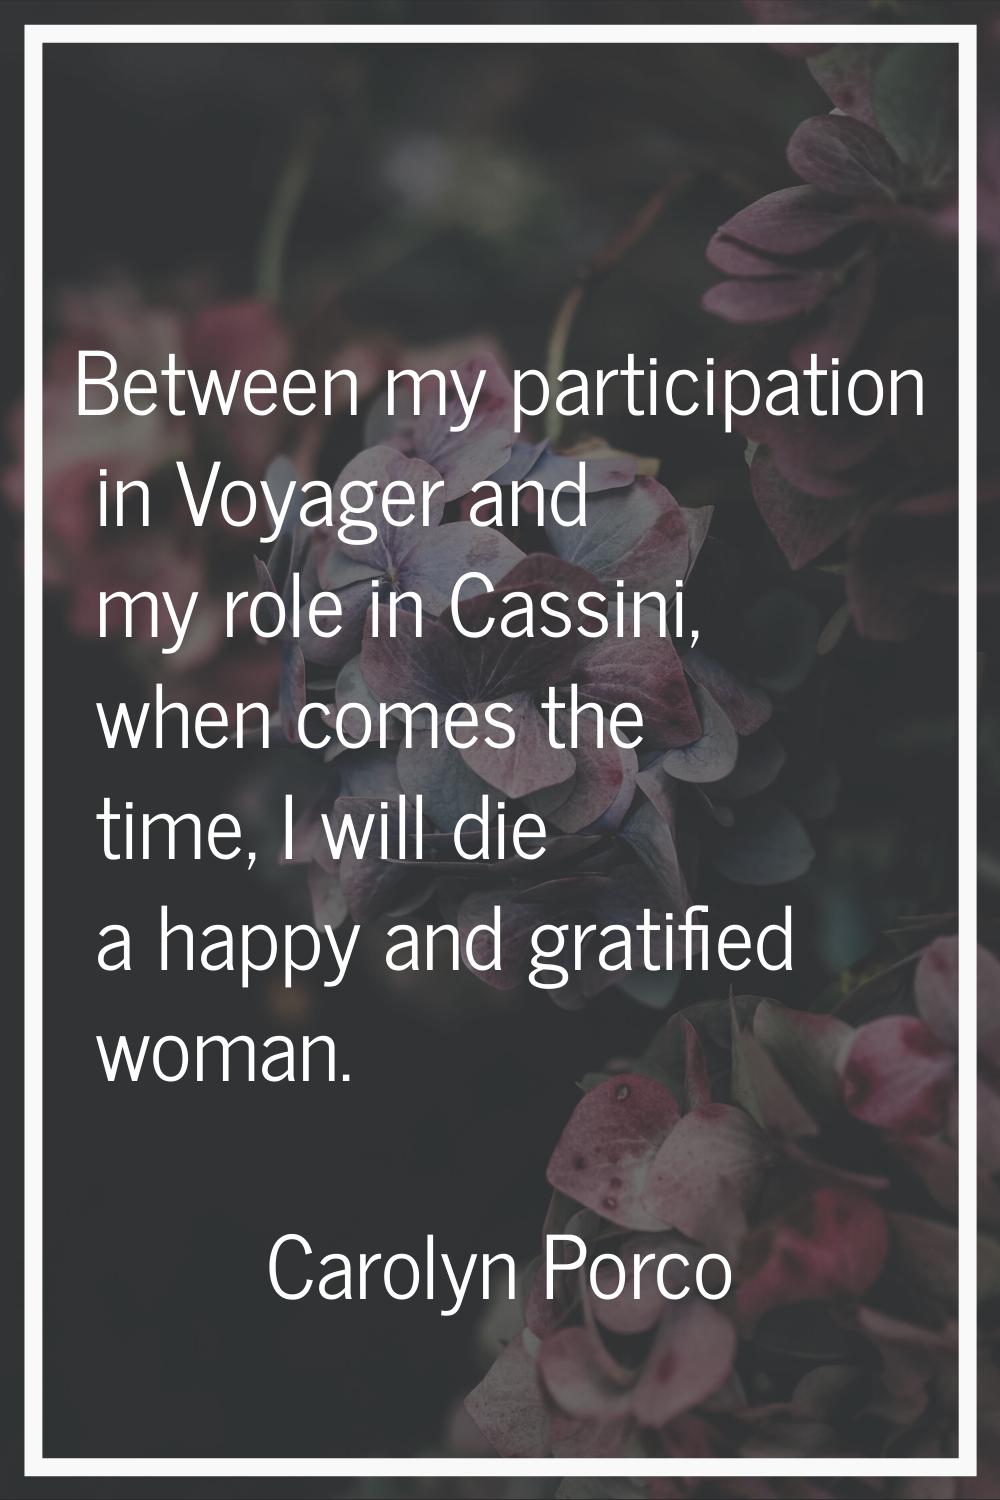 Between my participation in Voyager and my role in Cassini, when comes the time, I will die a happy